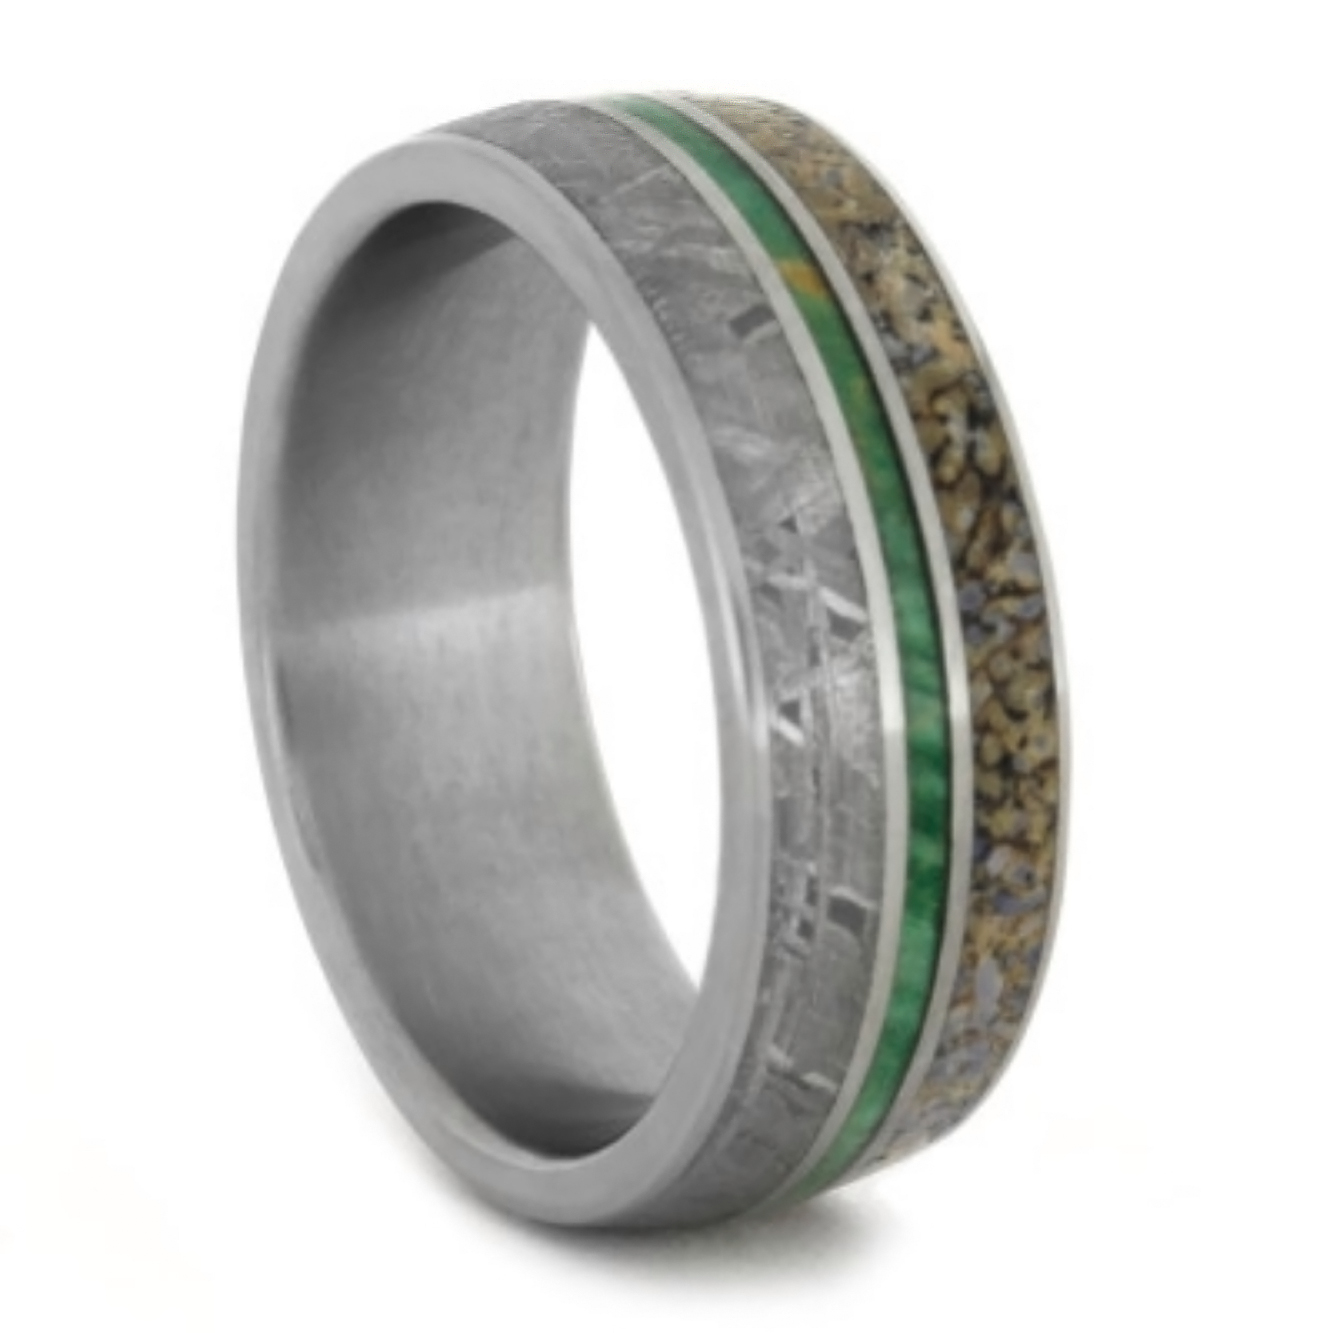 Green Box Elder wood on-center of Gibeon Meteorite and Dinosaur Bone, they are overlaid on a matte titanium comfort fit ring.